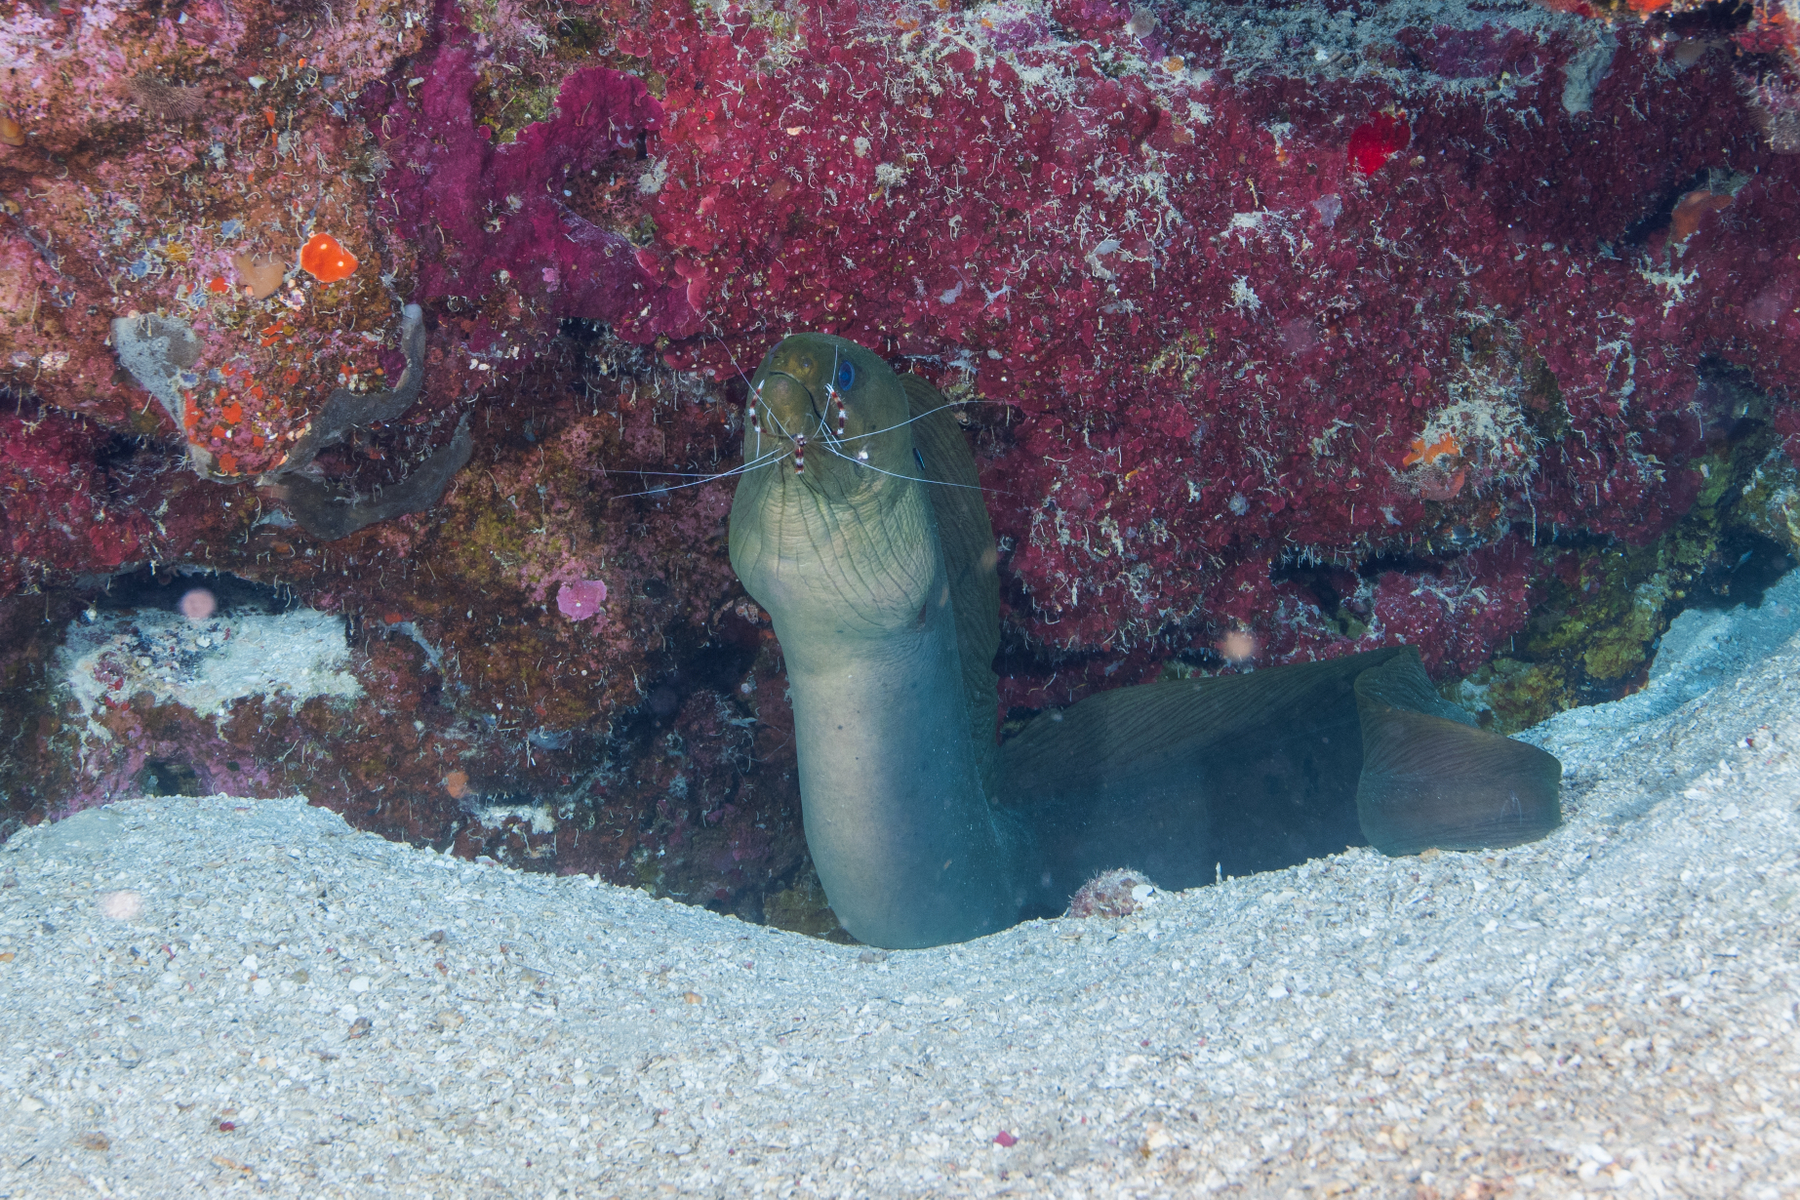 10/3/2021Banded Coral Shrimp getting fed by cleaning parasites of the skins and scales of predators like this Green Moral Eel.